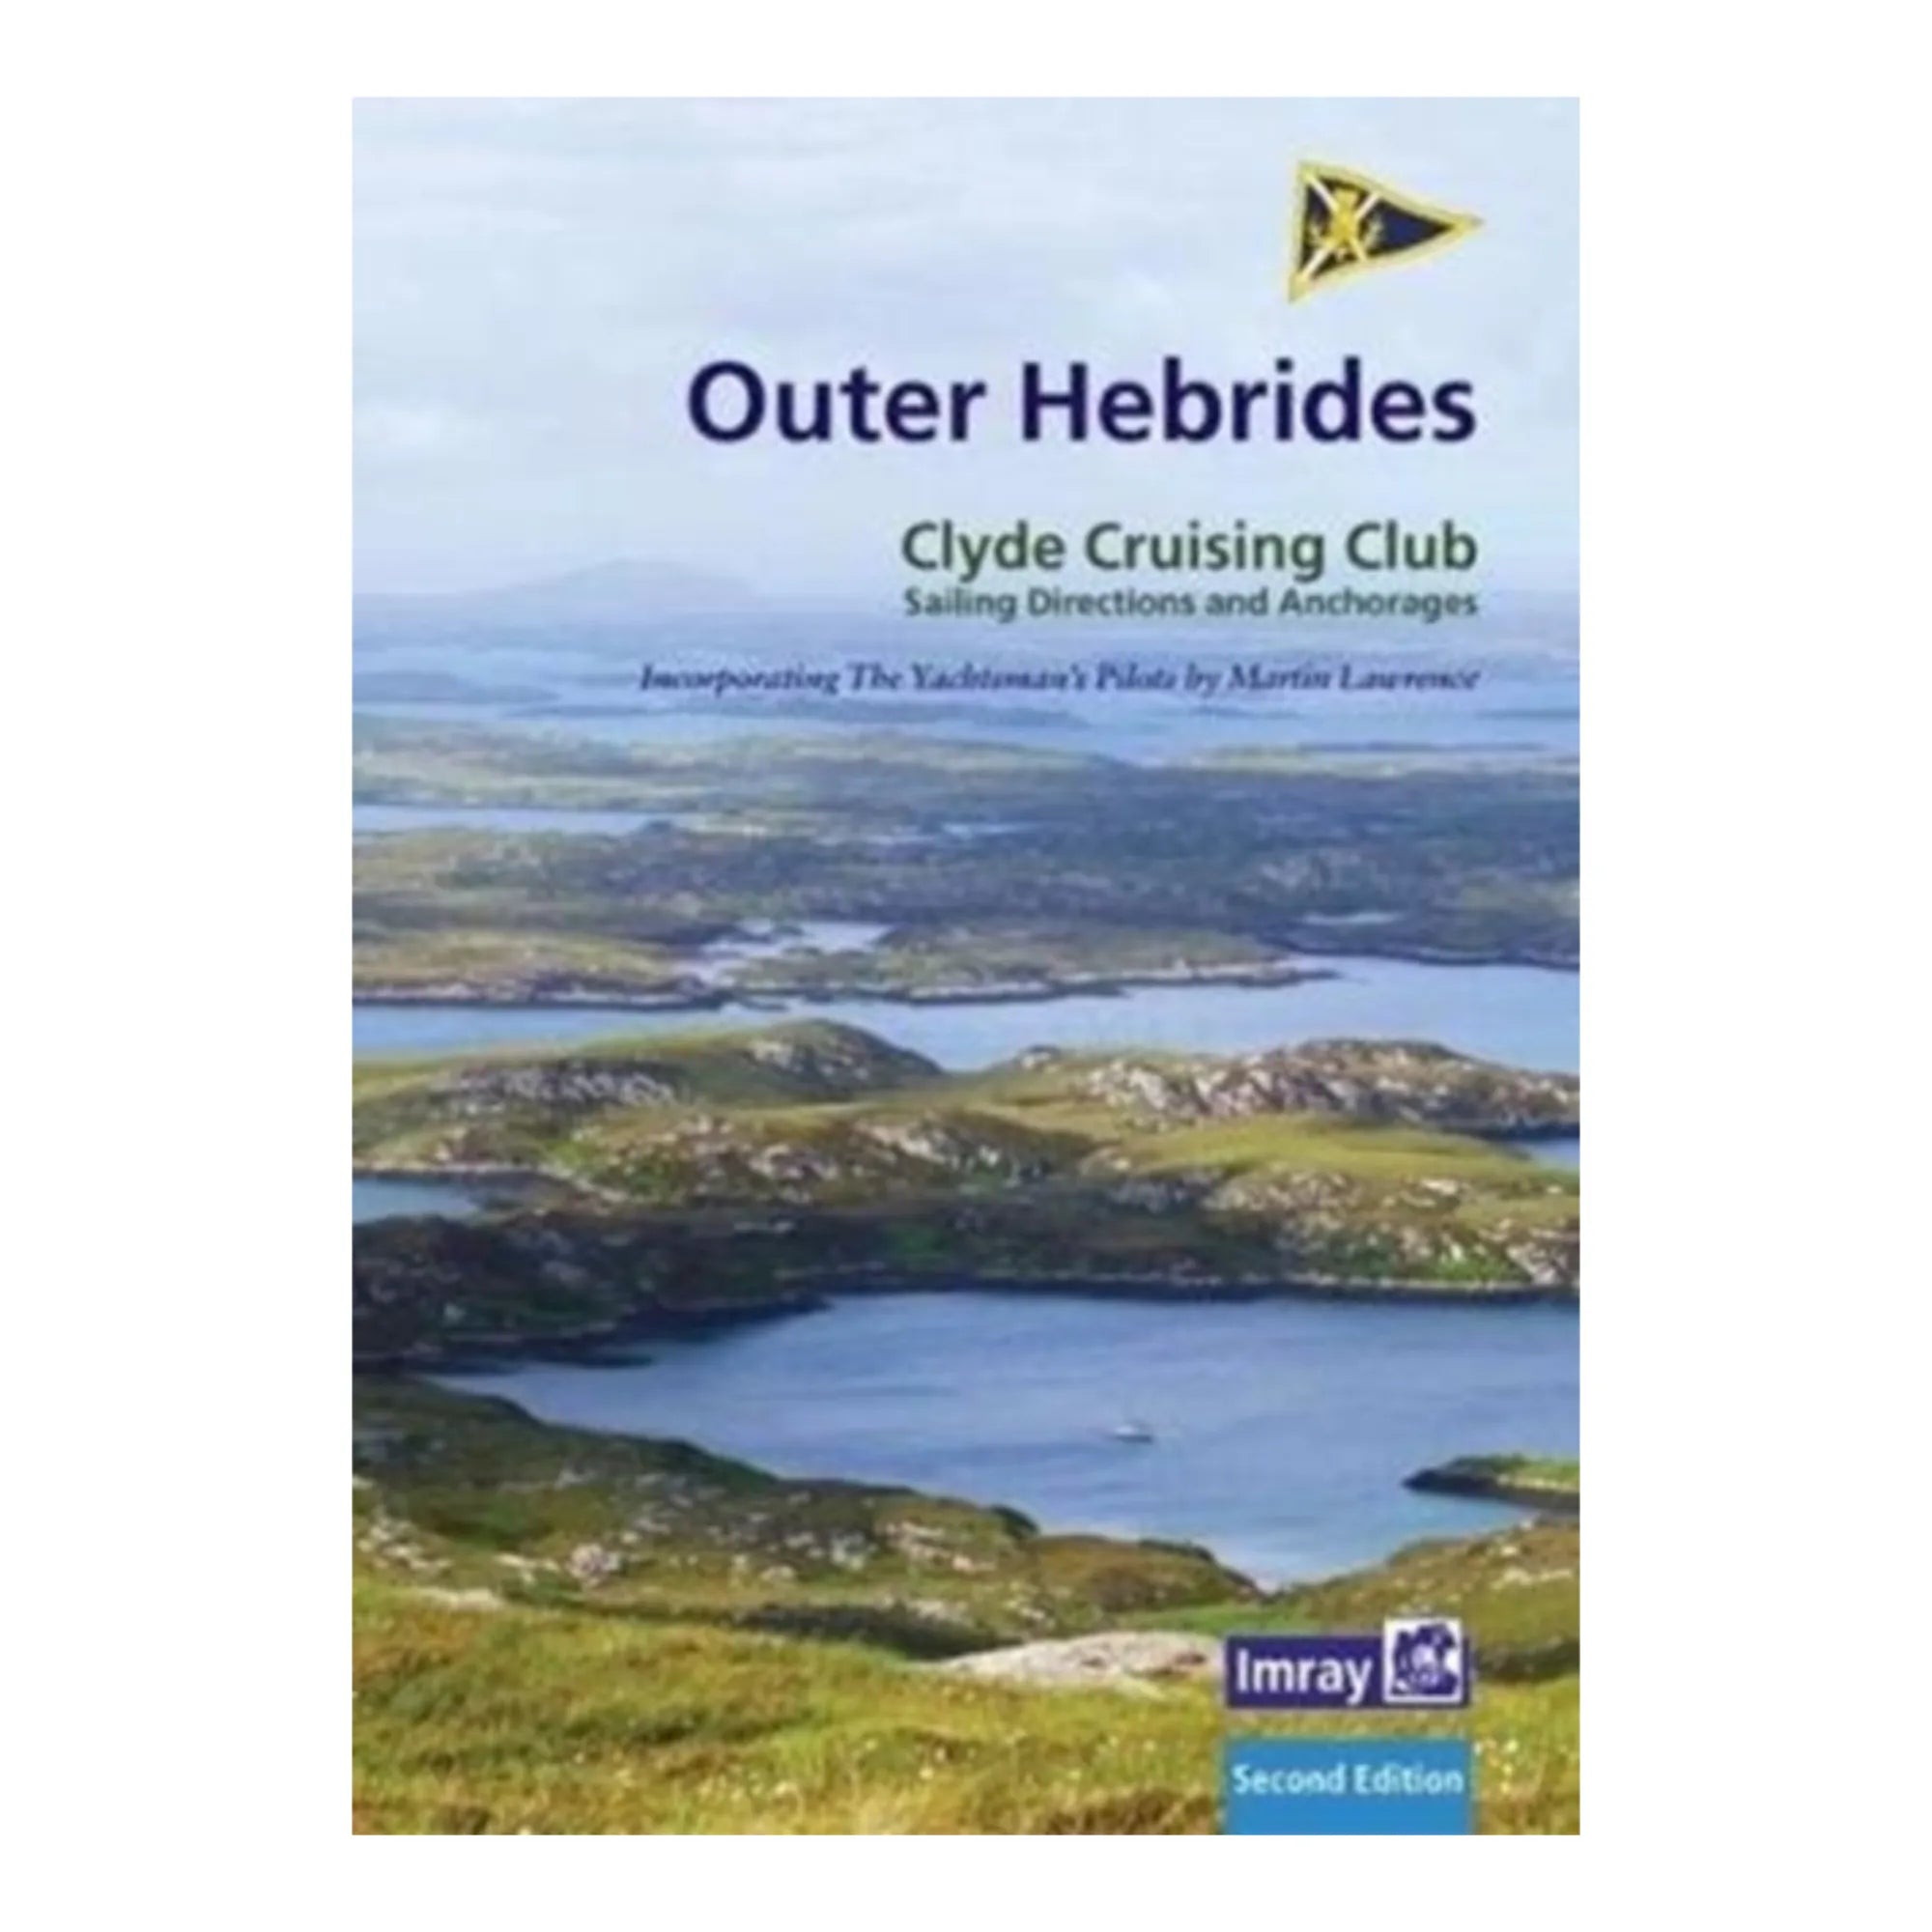 Outer Hebrides (2nd Edition)